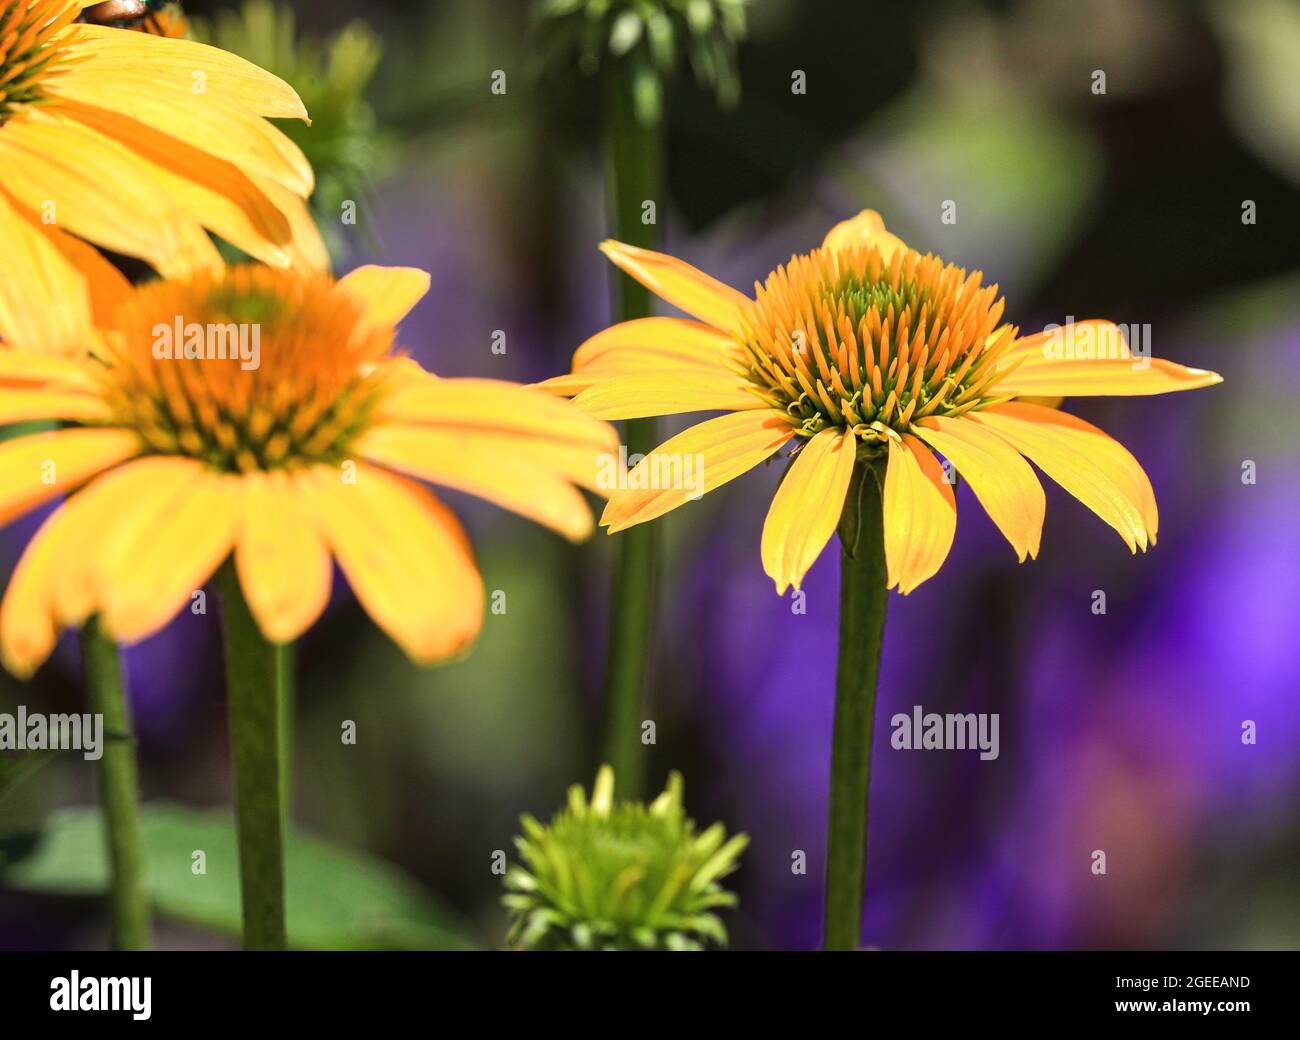 Bright Yellow Echinacea flowers with a purple and green colored background. Stock Photo